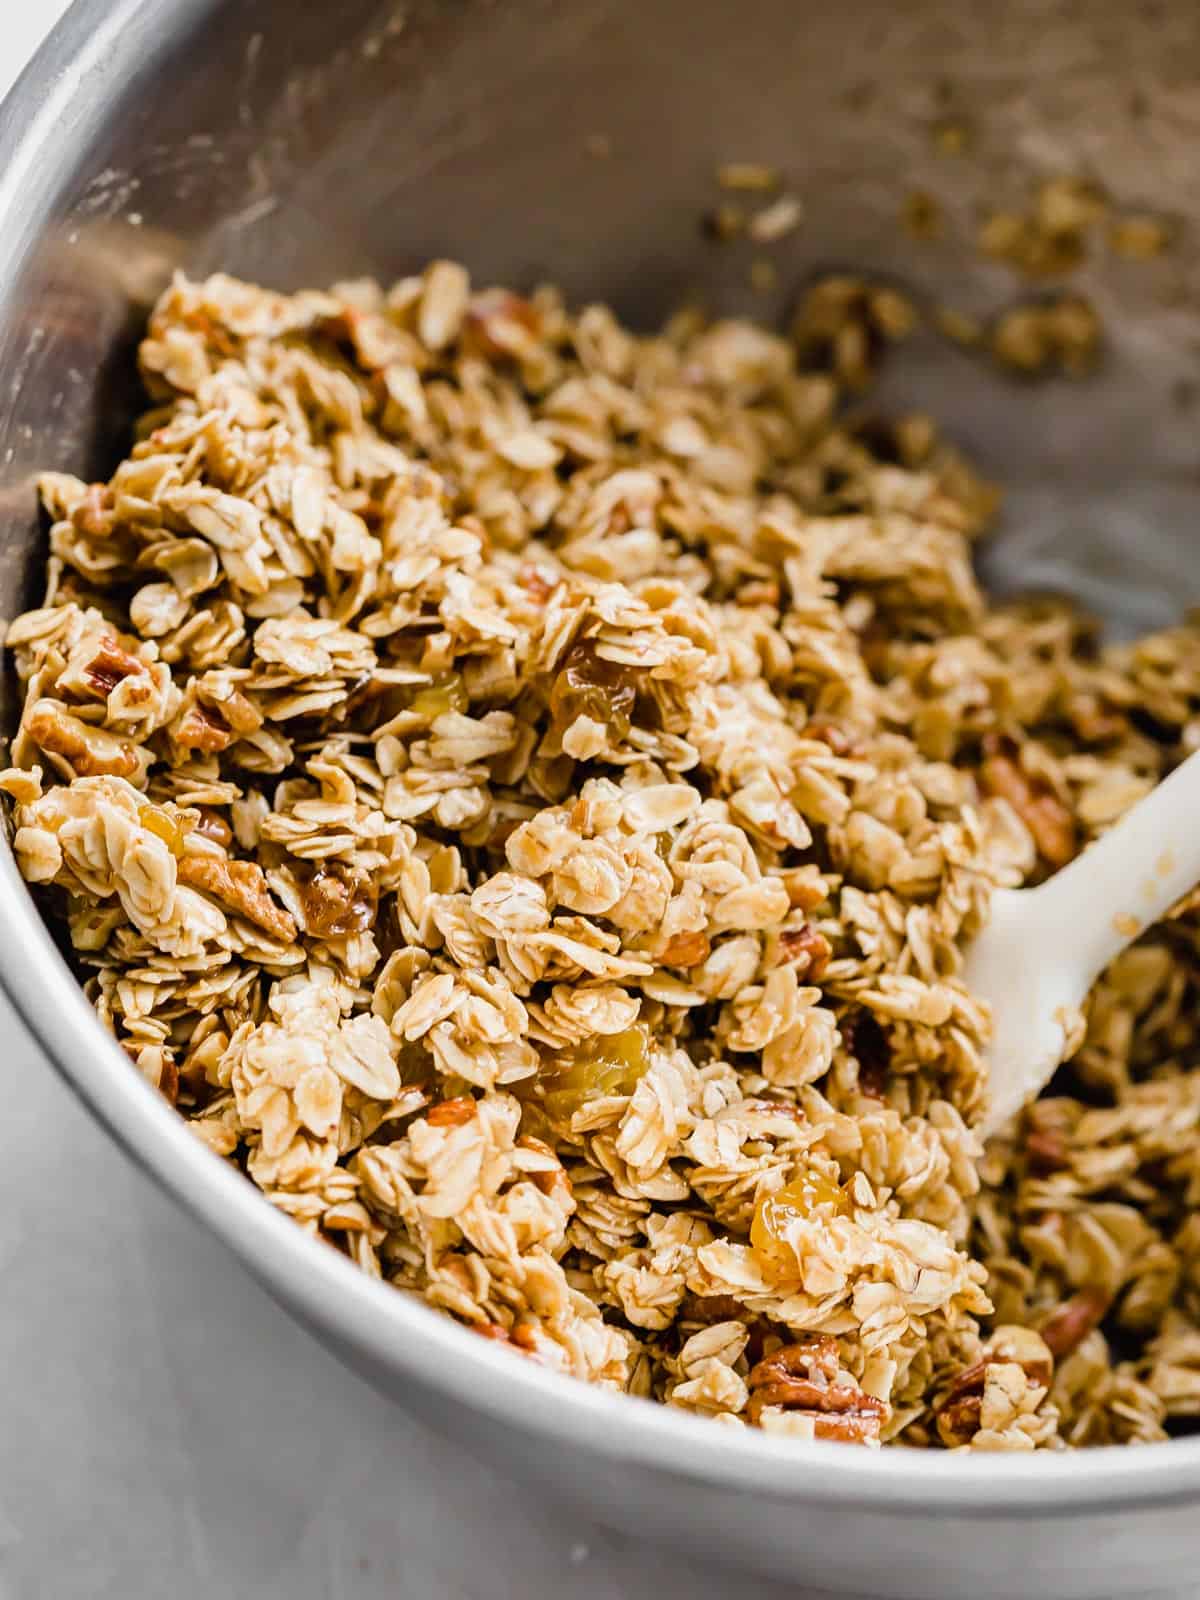 A silver bowl filled with an Oatmeal Raisin Granola Bars recipe mixture.